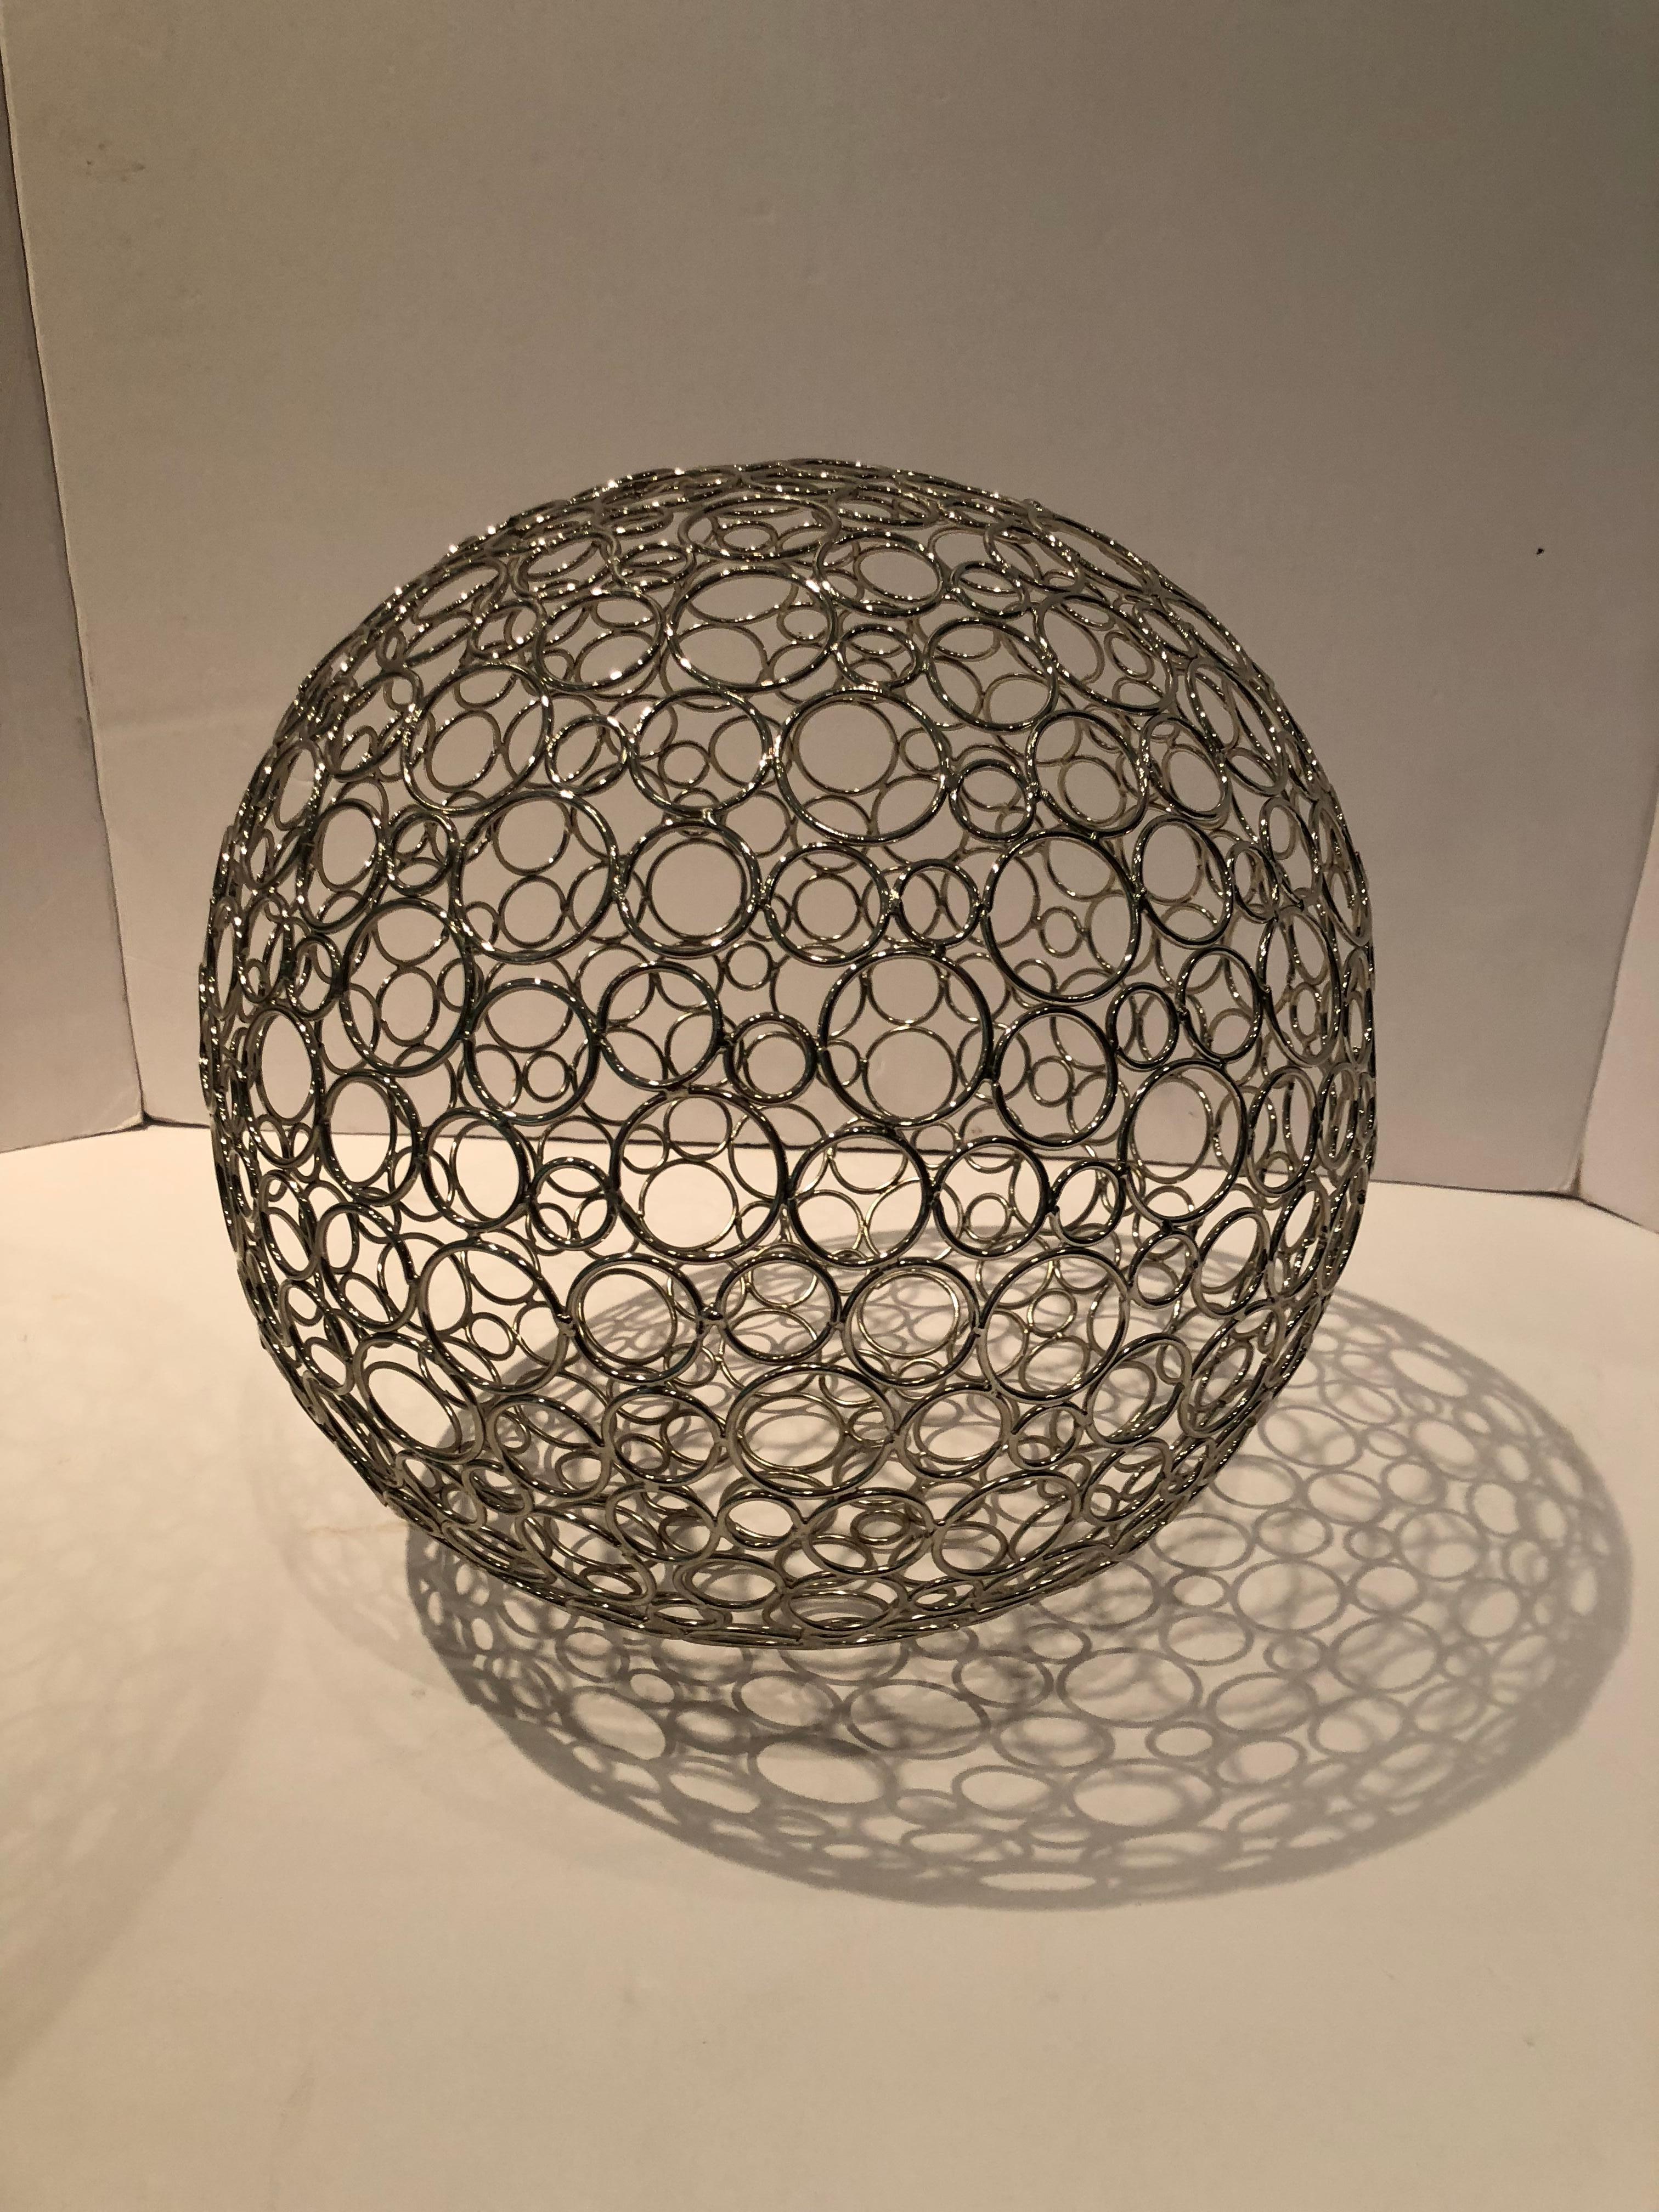 An eye-catching pair of wire spheres meticulously created by an artist by soldering each circle individually. Both spheres are made of solid brass with nickel plating. One is slightly more nickel in color than the other, but hardly noticeable. The